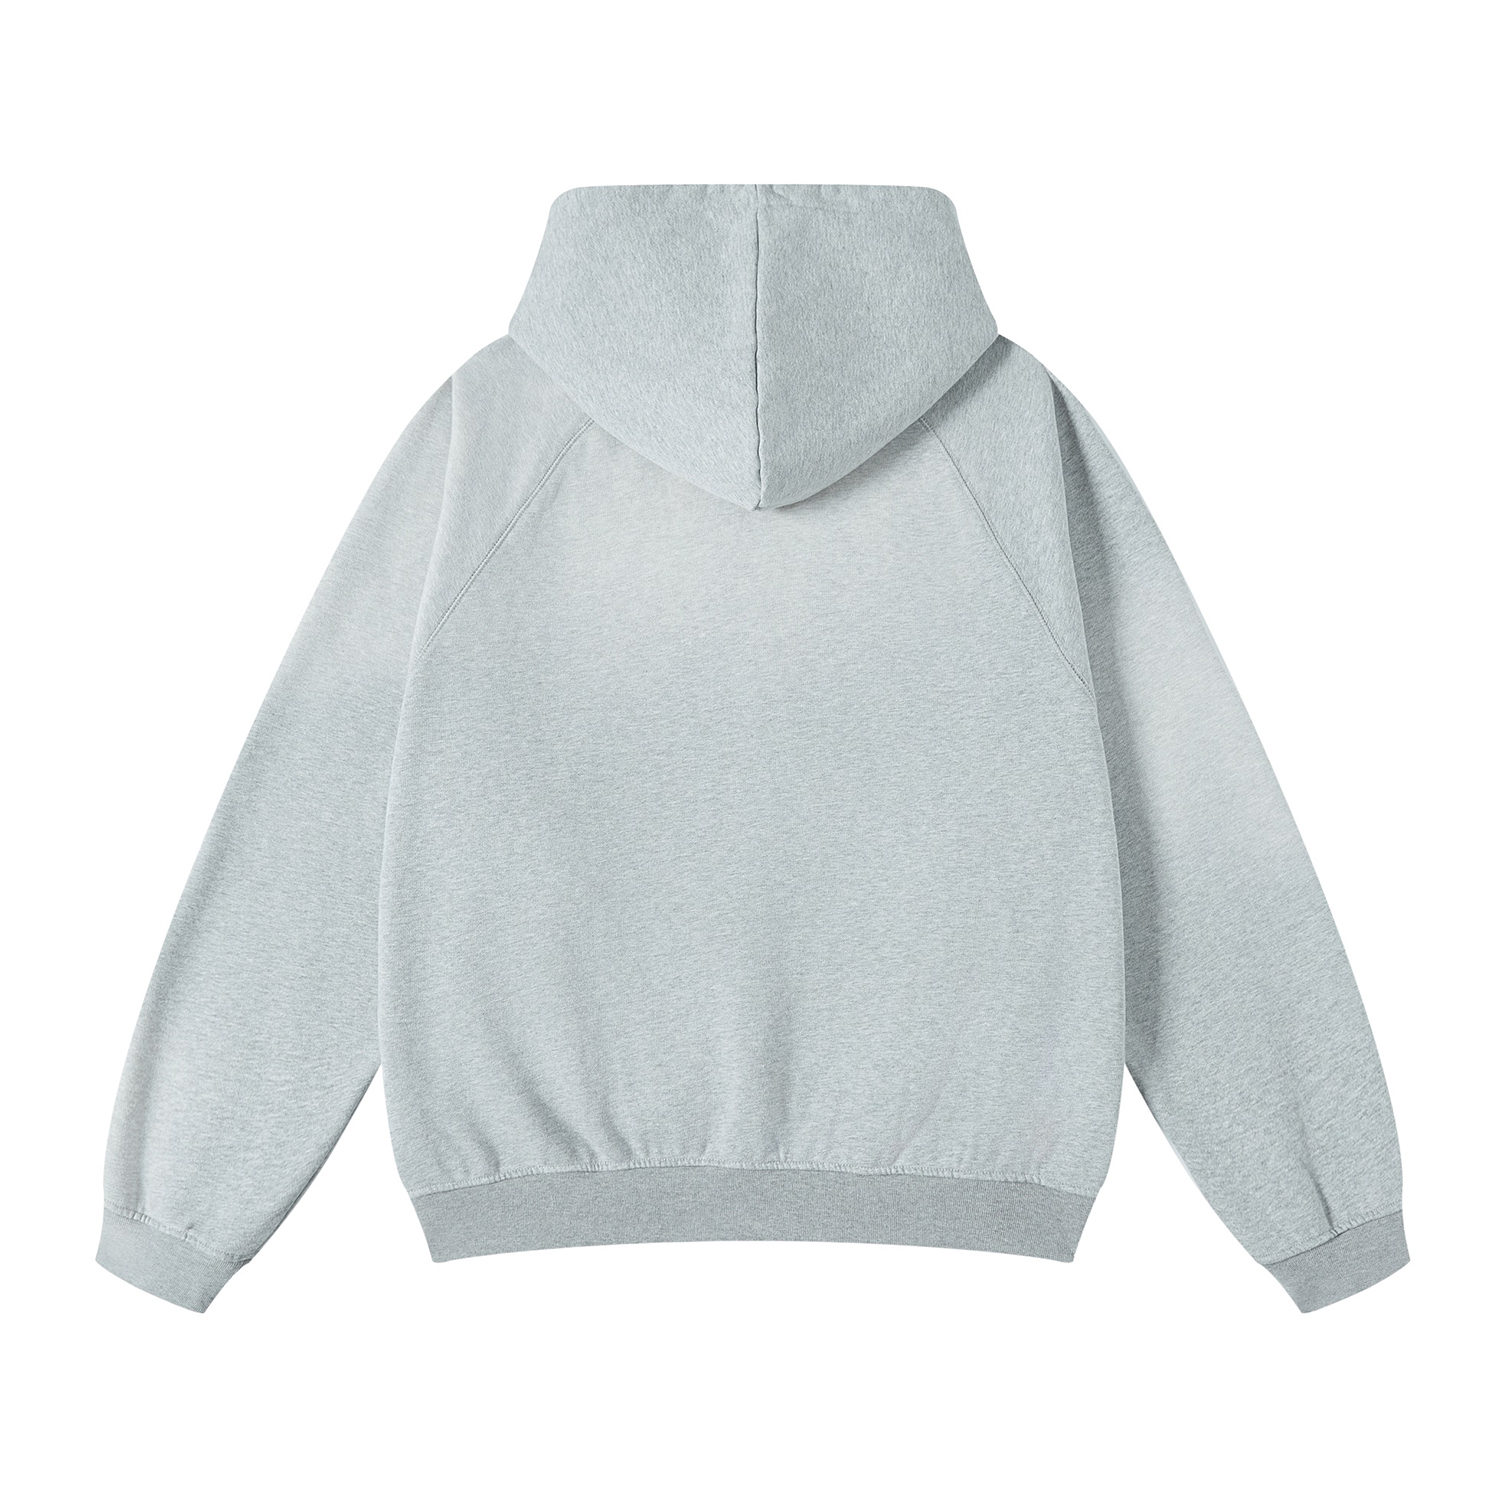 Streetwear Unisex Ombre Washed Effect Colored Hoodie - Print On Demand-6